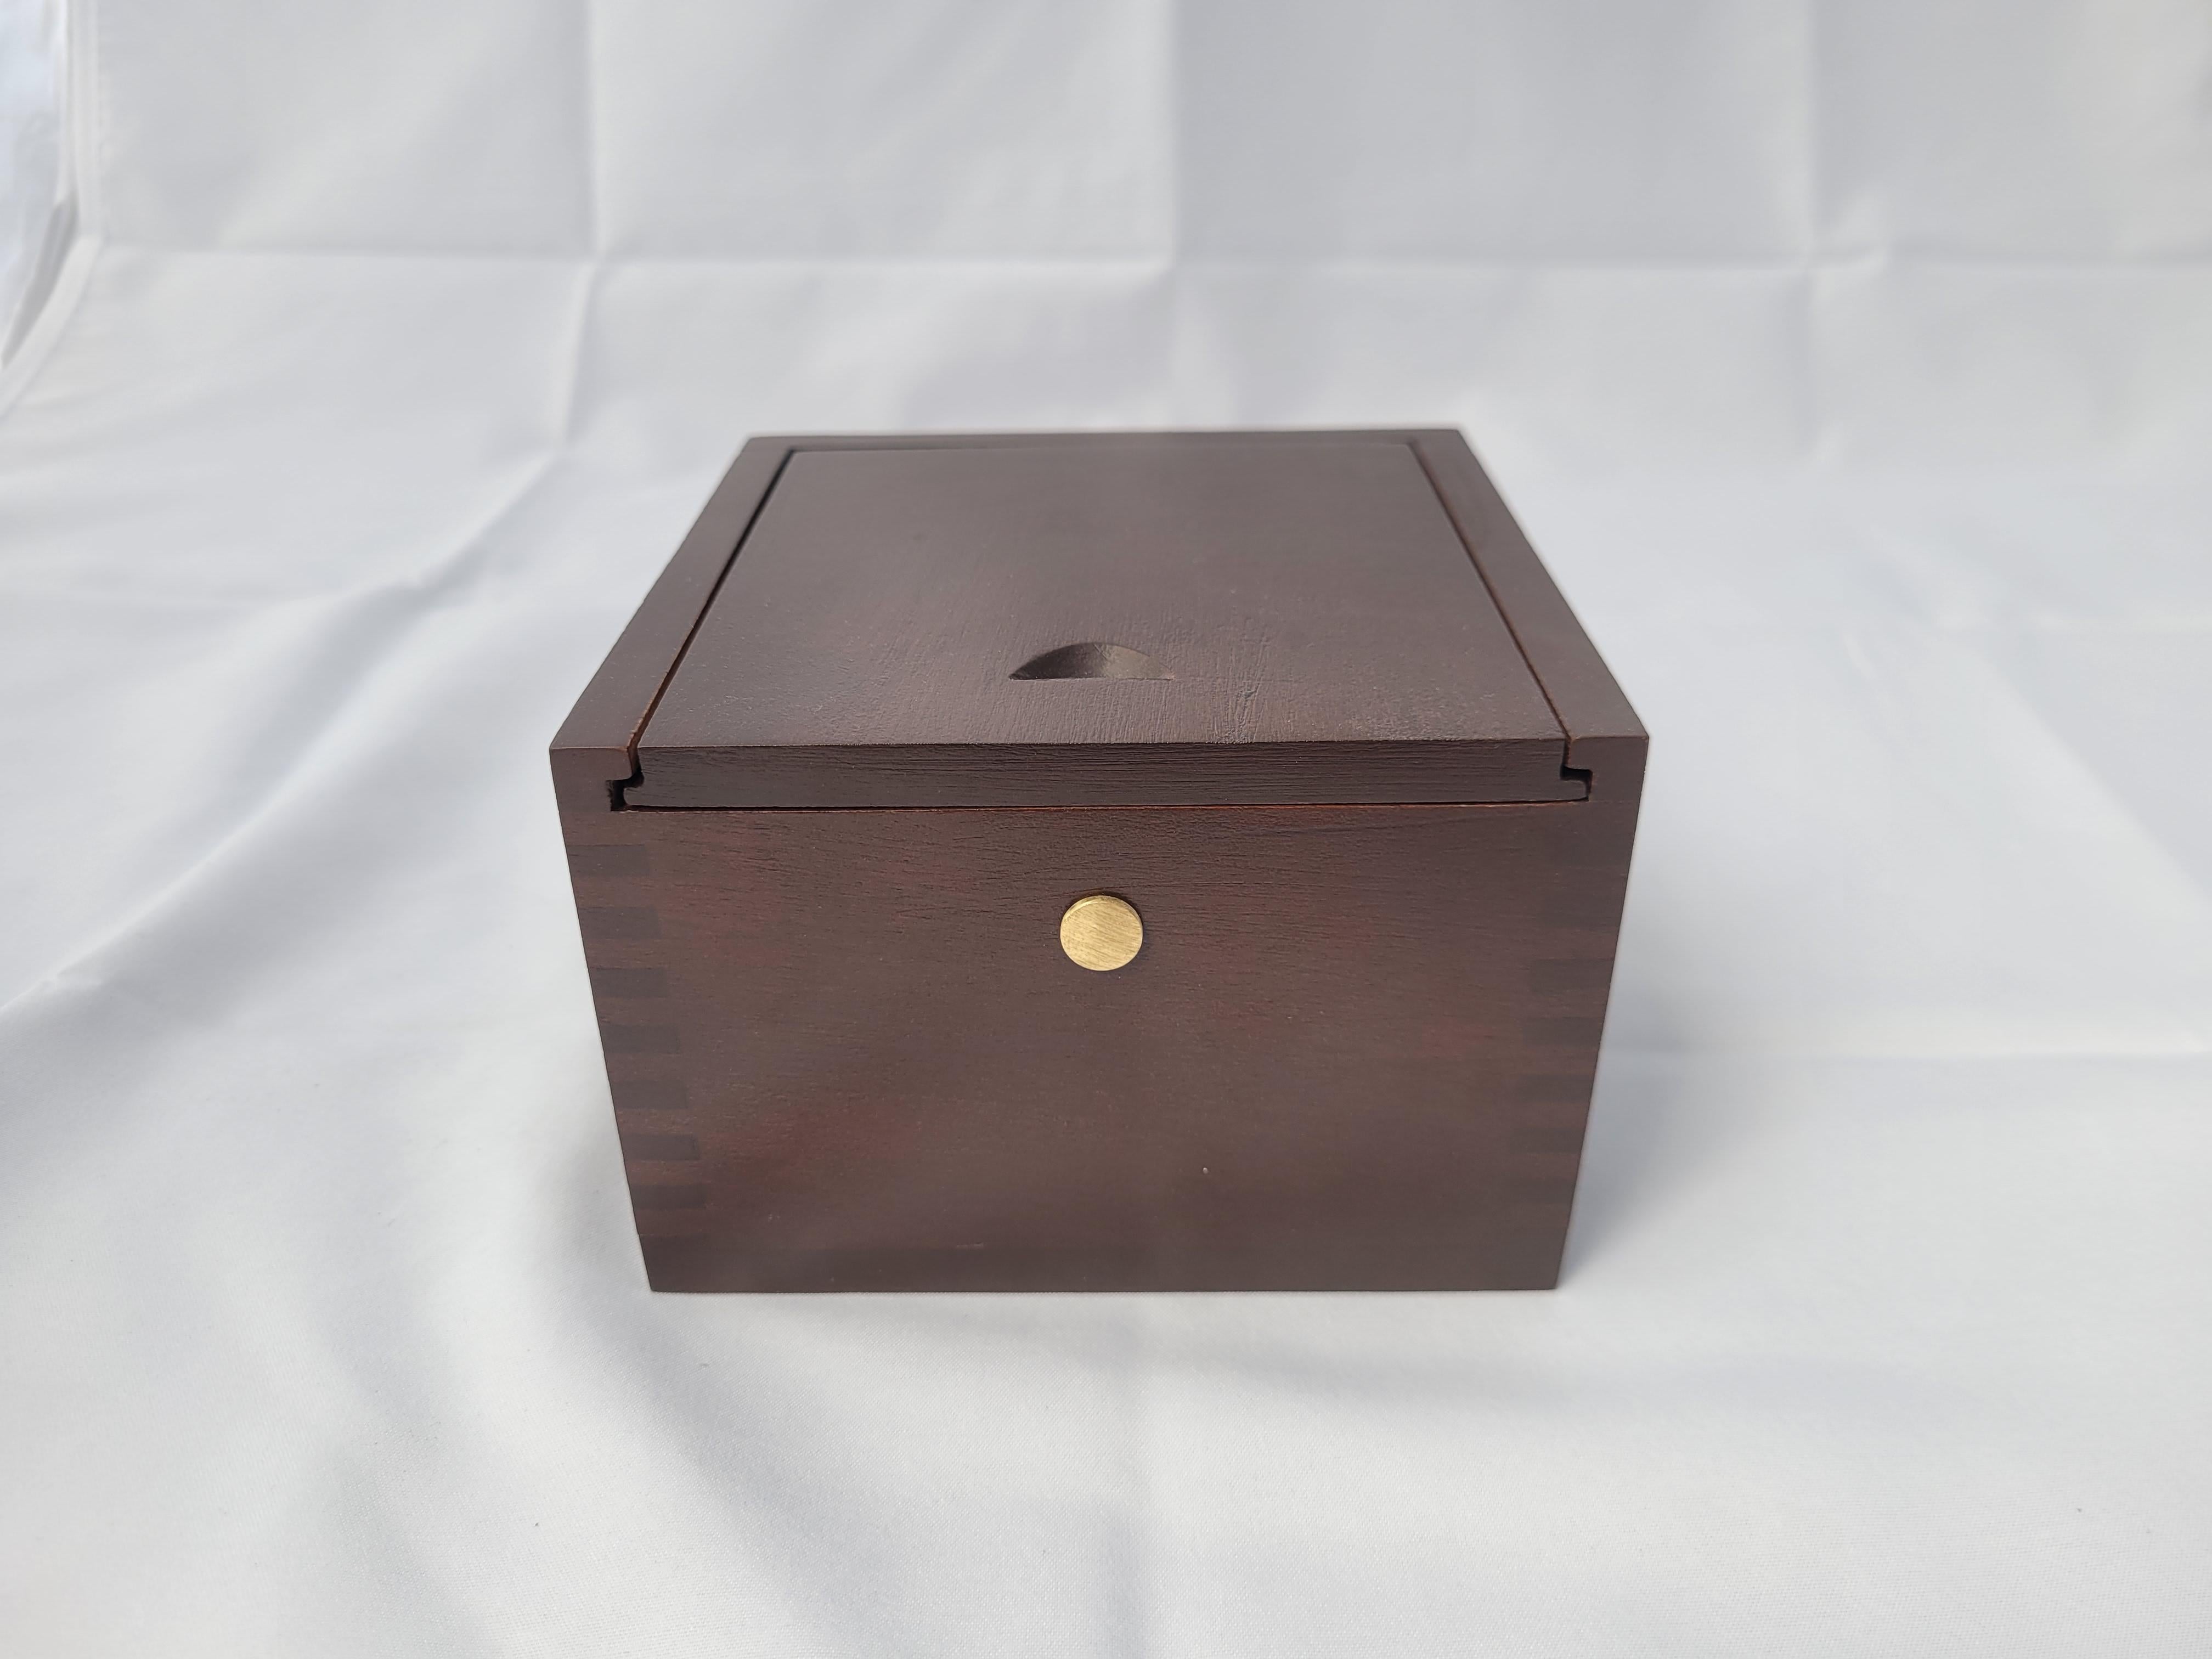 Mid-20th Century Brass Boat Compass in Varnished Wood Box For Sale